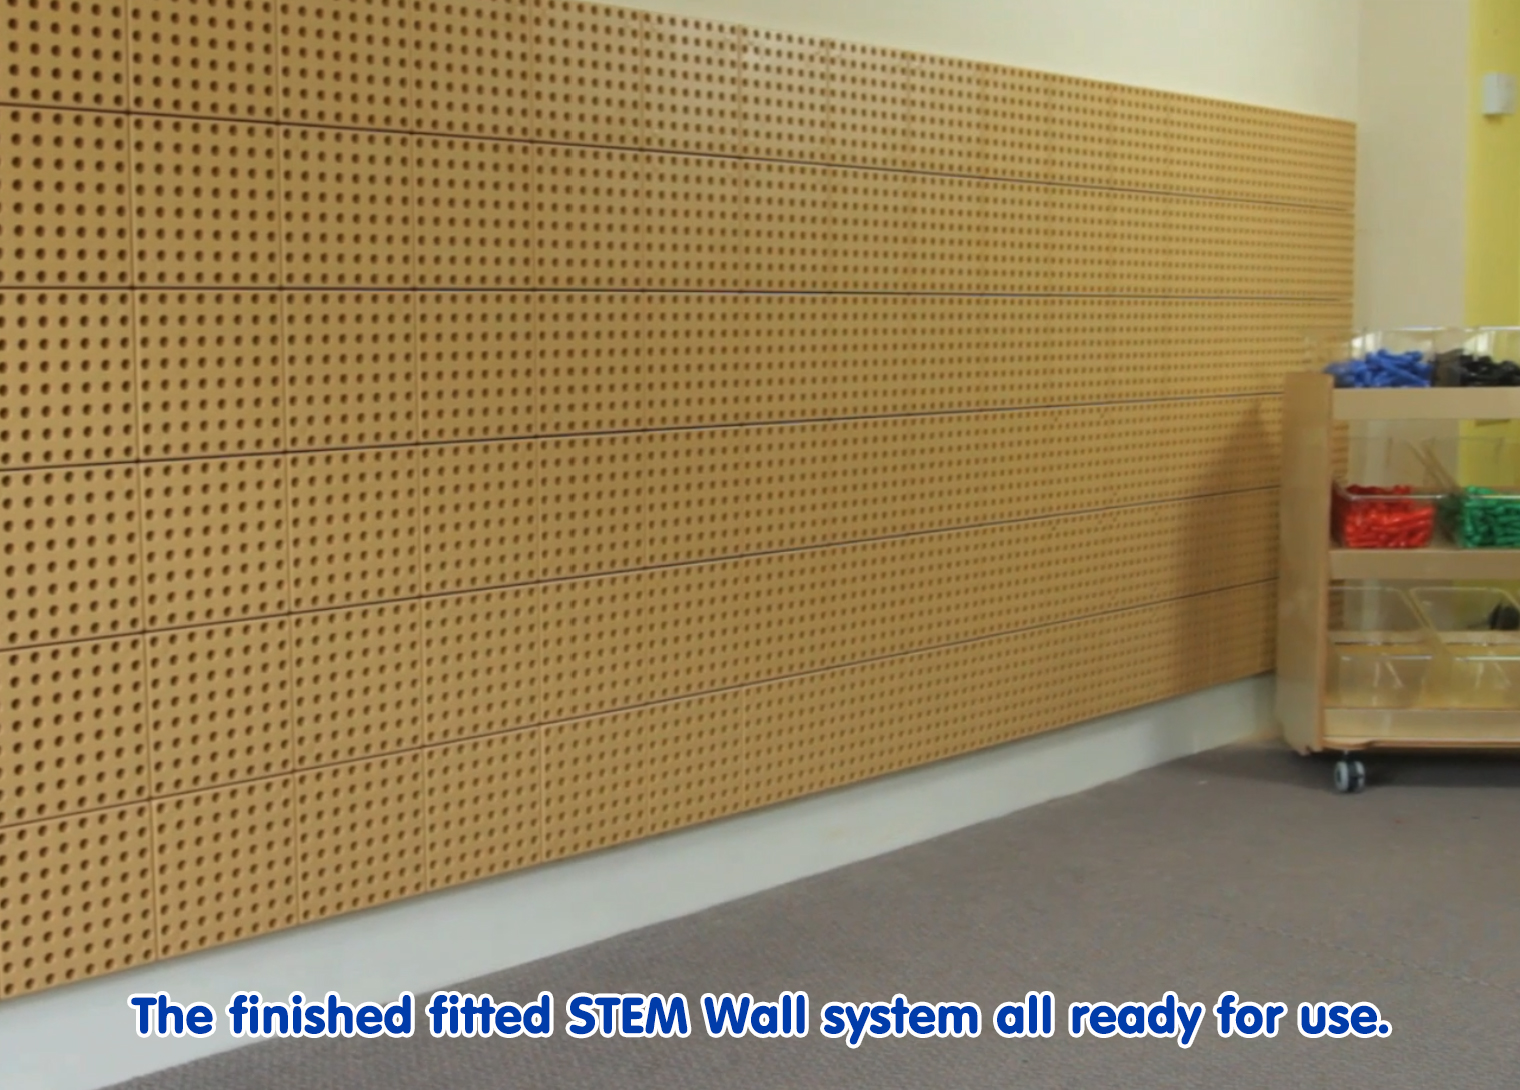 Fitting an Indoor STEM Wall WITH Back Panels